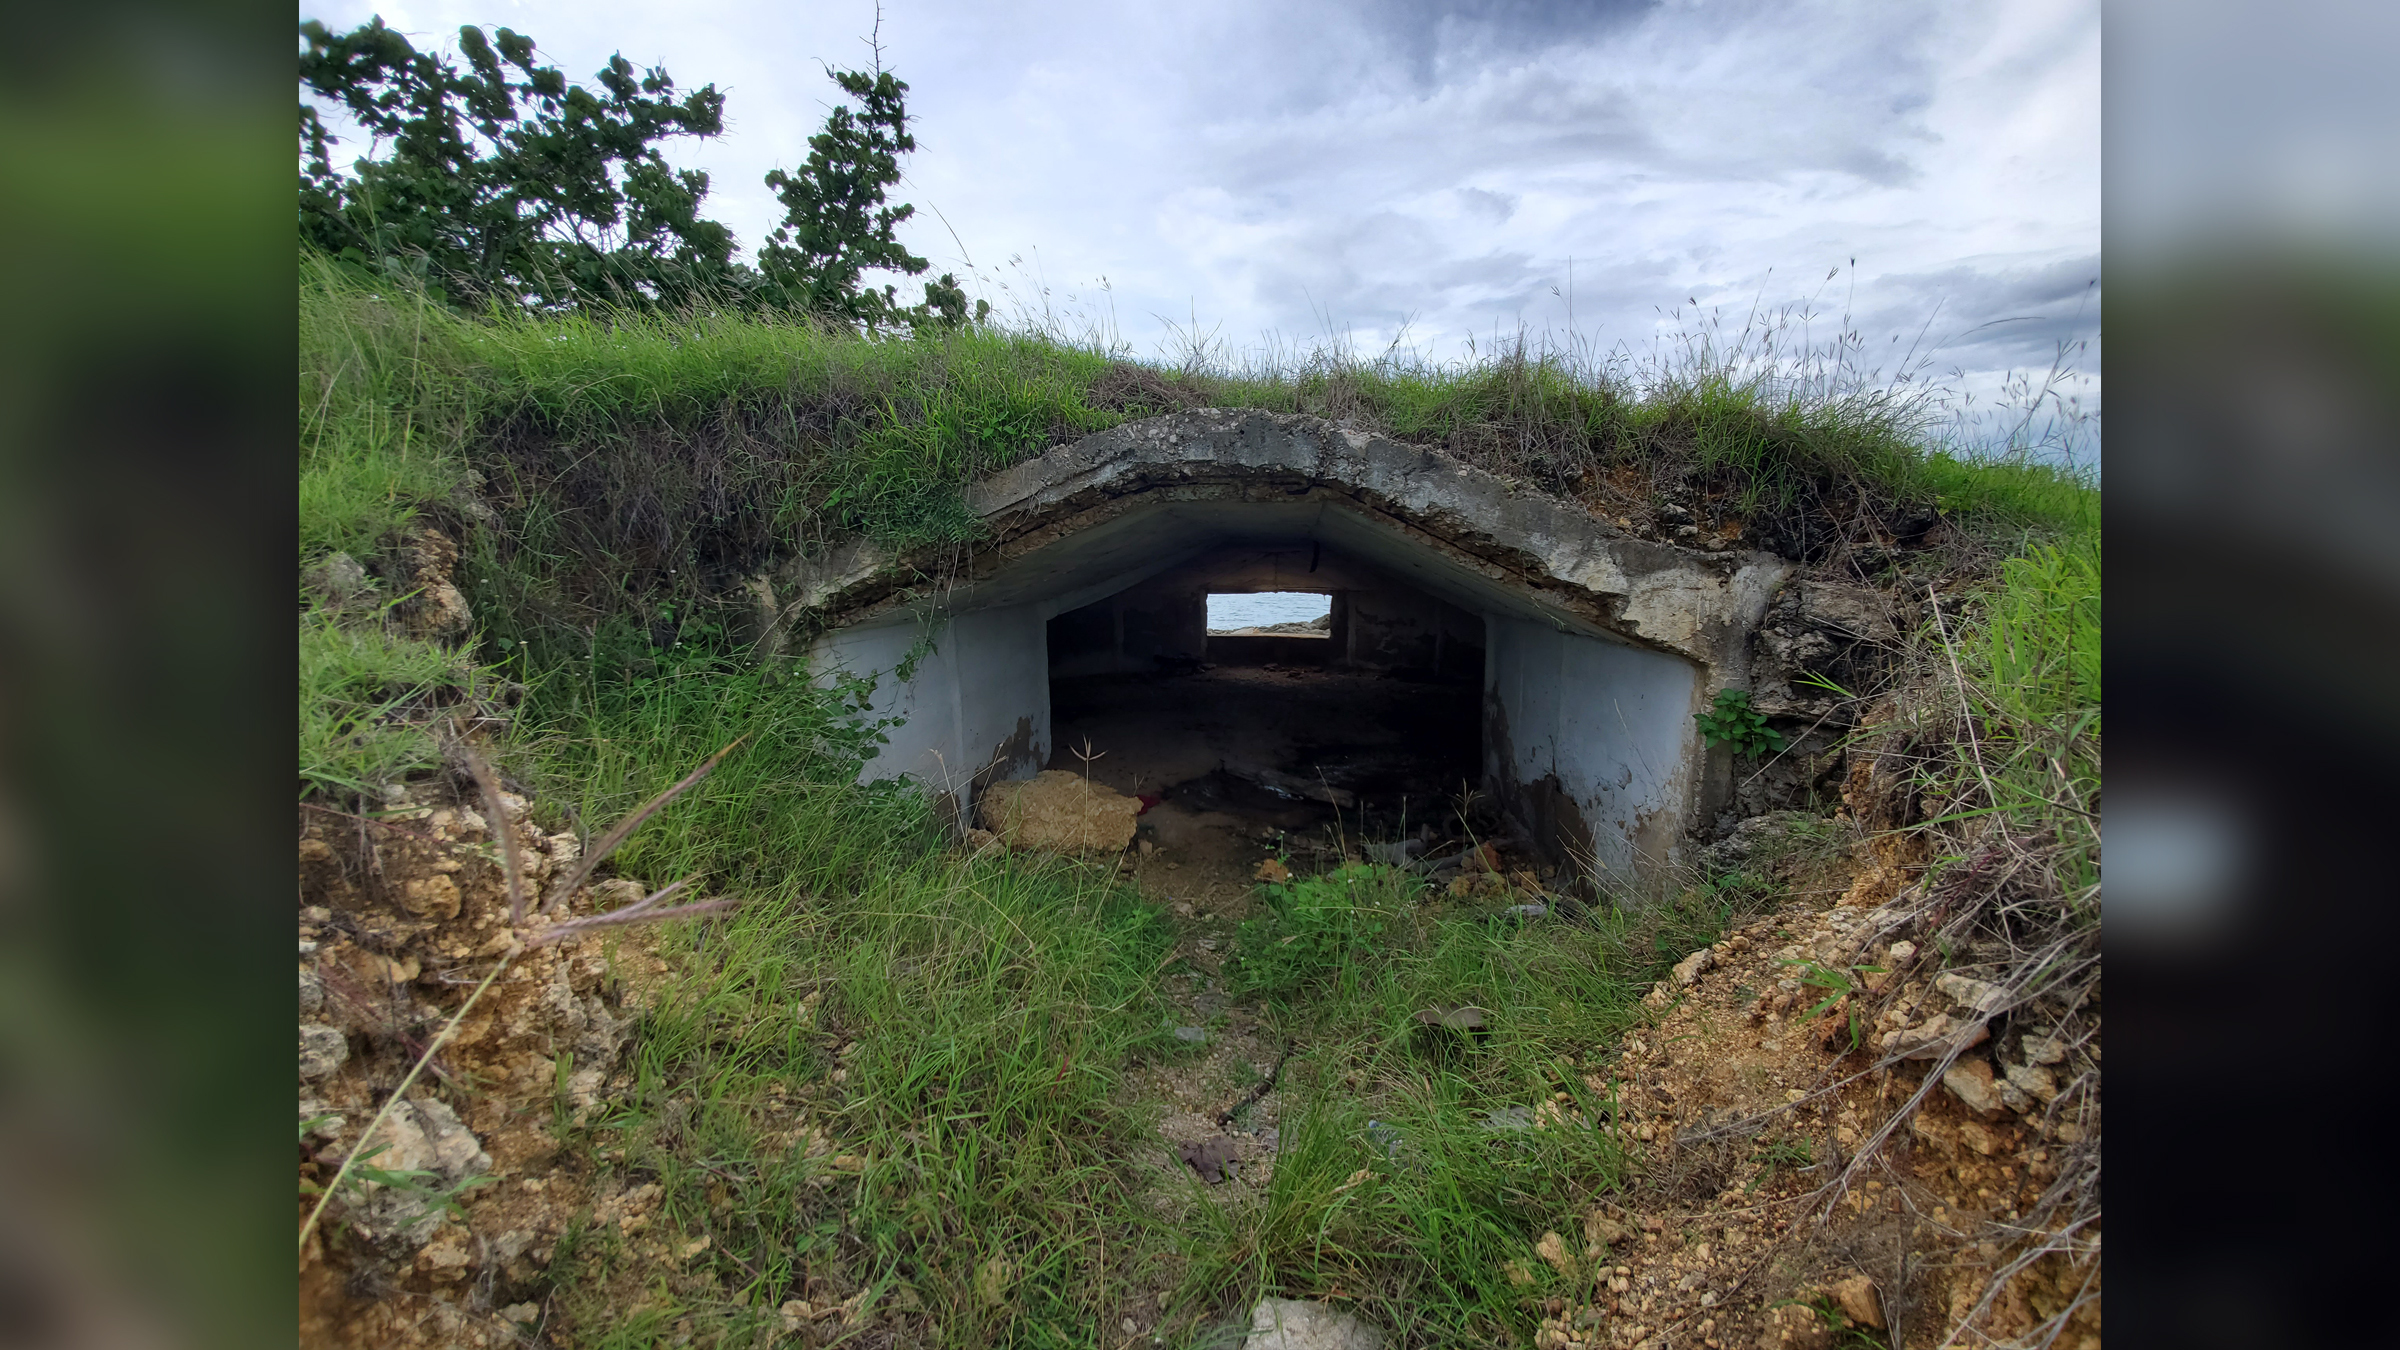 The bunkers and trenches combined with storage areas formed an interconnected system of fortifications.